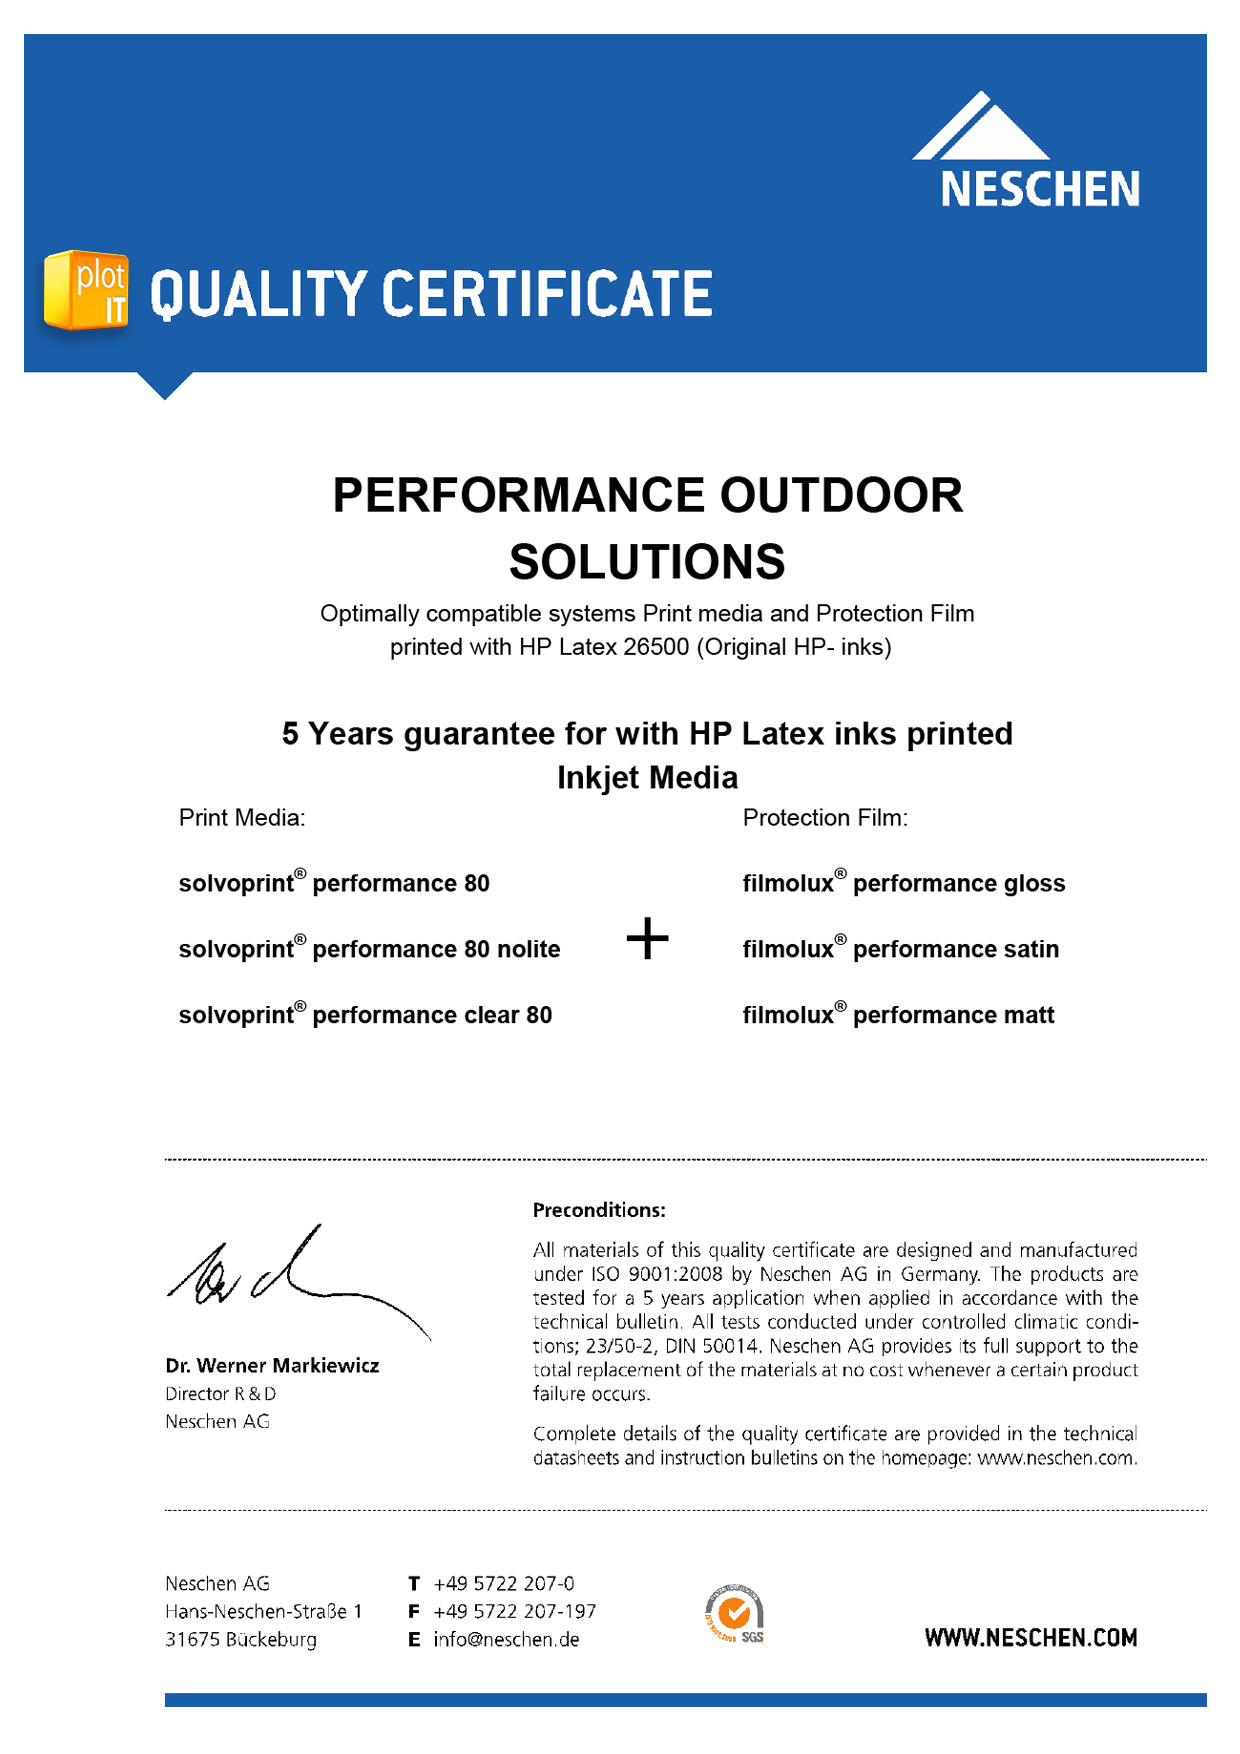 Solvoprint Performance 80_LATEX QUALITY CERTIFICATION